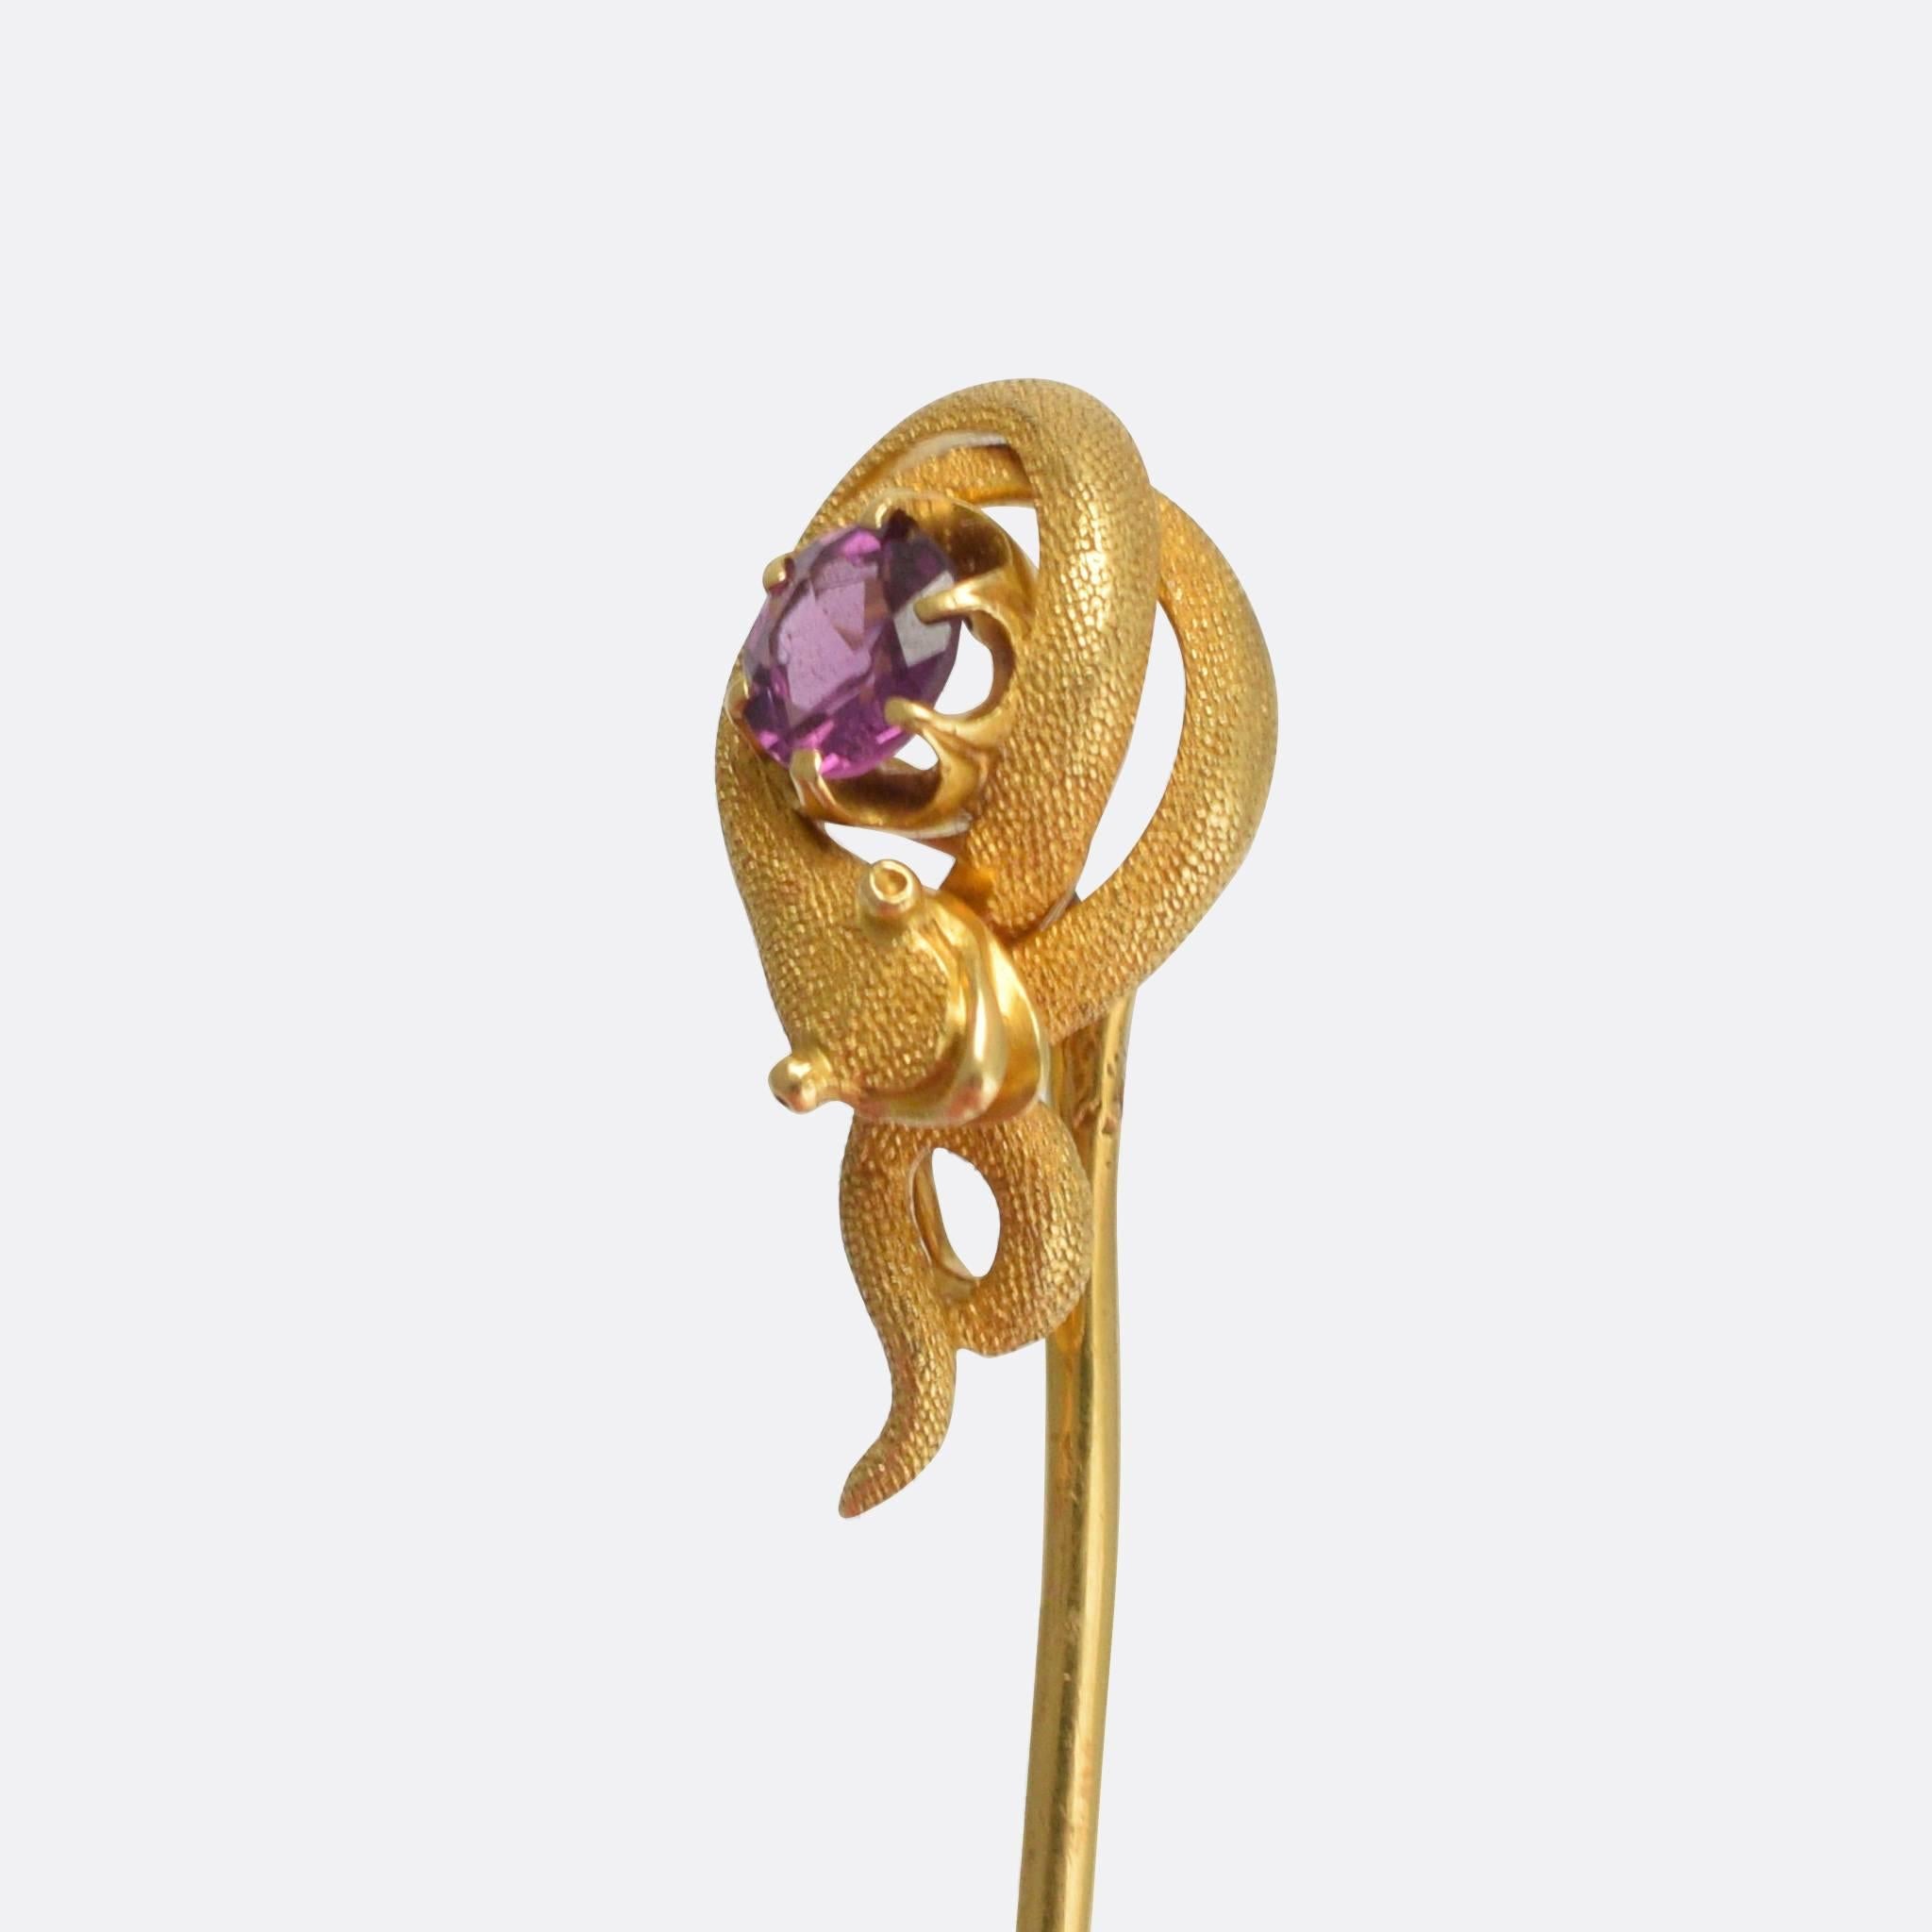 A cool antique stick pin, the head modelled as a snake, coiled around a faceted amethyst. The goldwork is particularly well executed, with beautiful textured skin and a cartoon-like face. Modelled in 18k gold throughout.

STONES
Natural